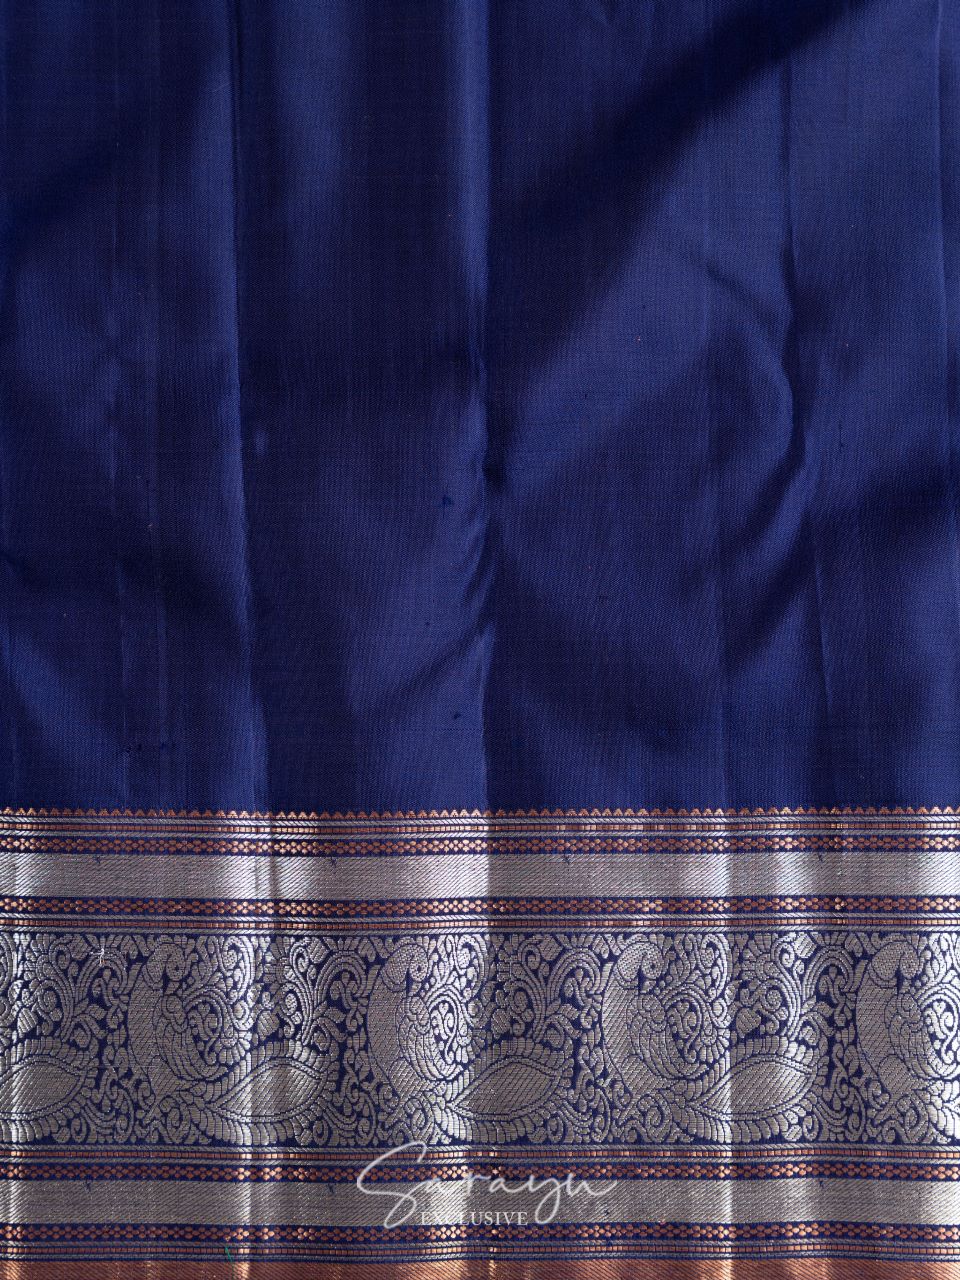 Pink and blue pure kanchi silk